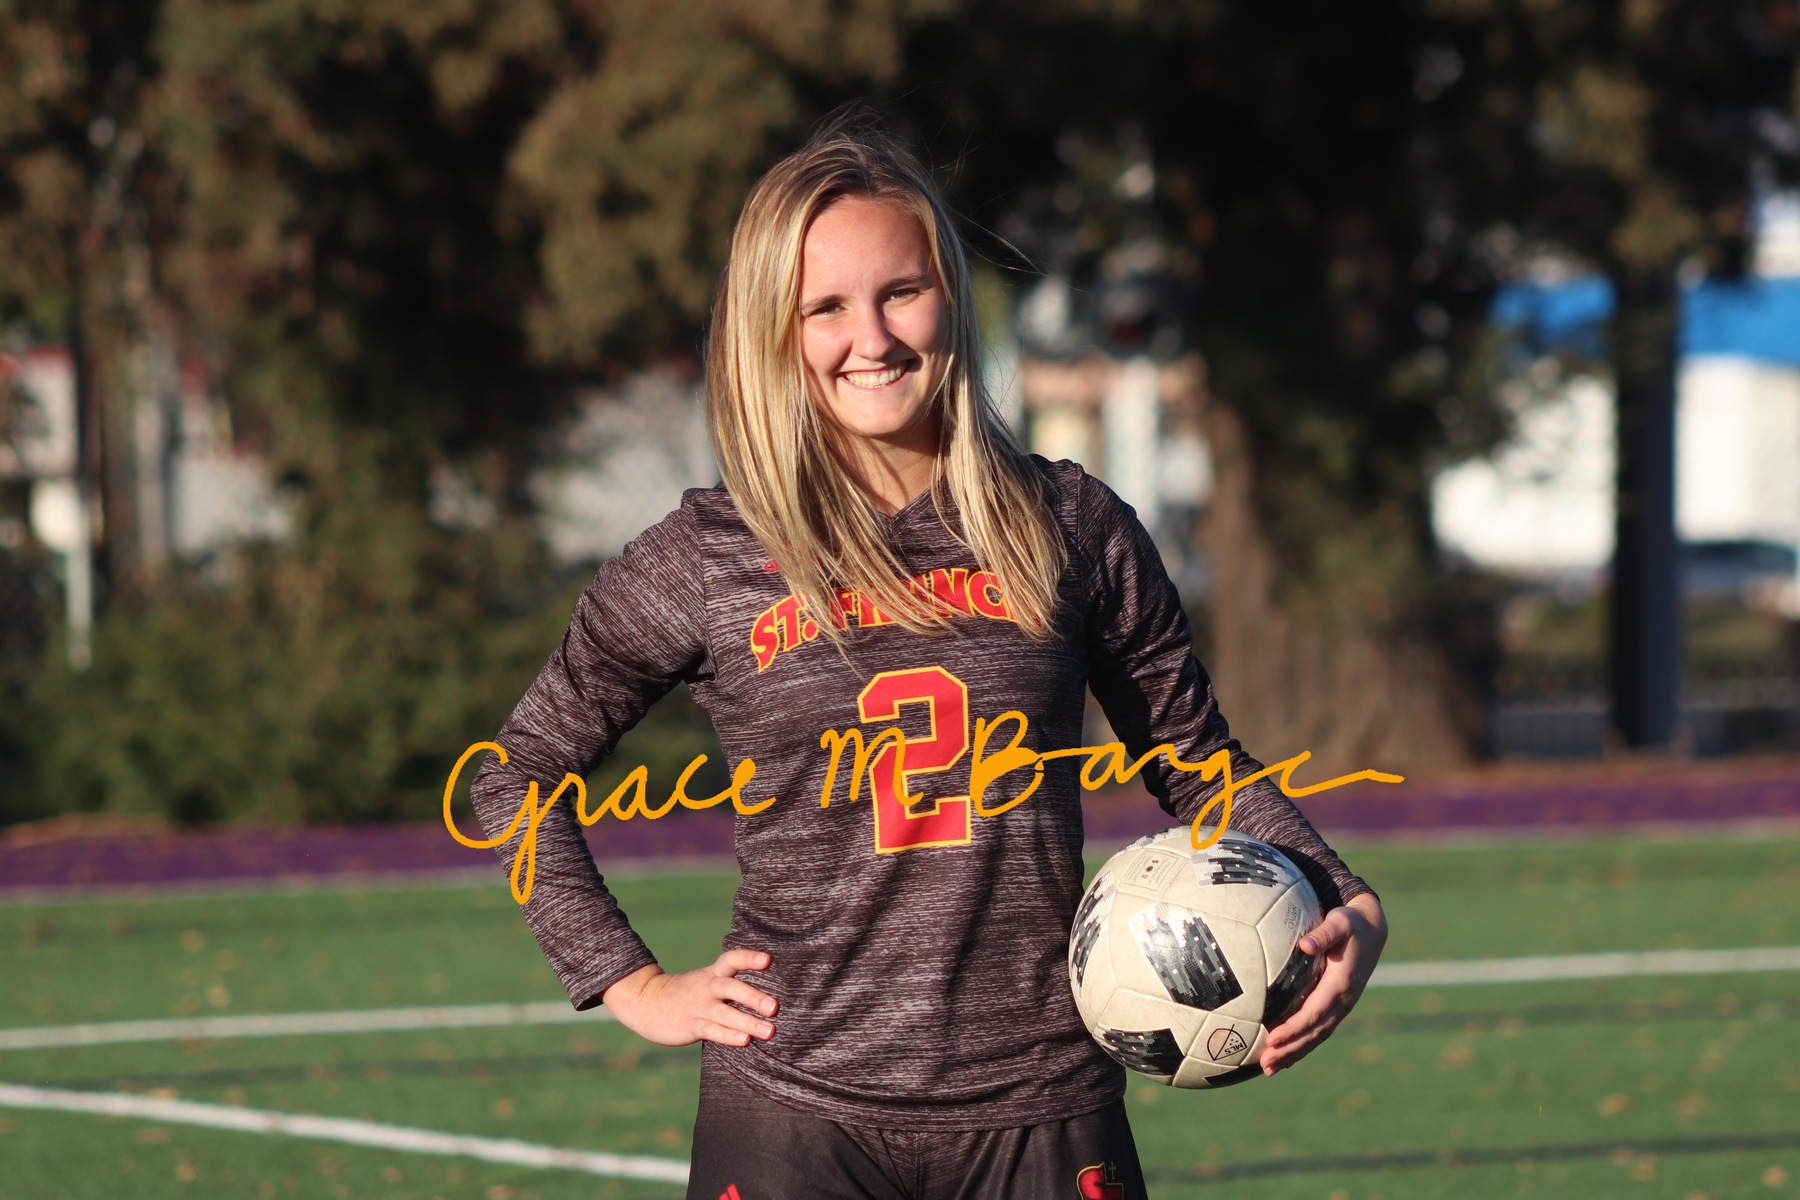 Get to Know: Soccer's  #2 Grace Barger